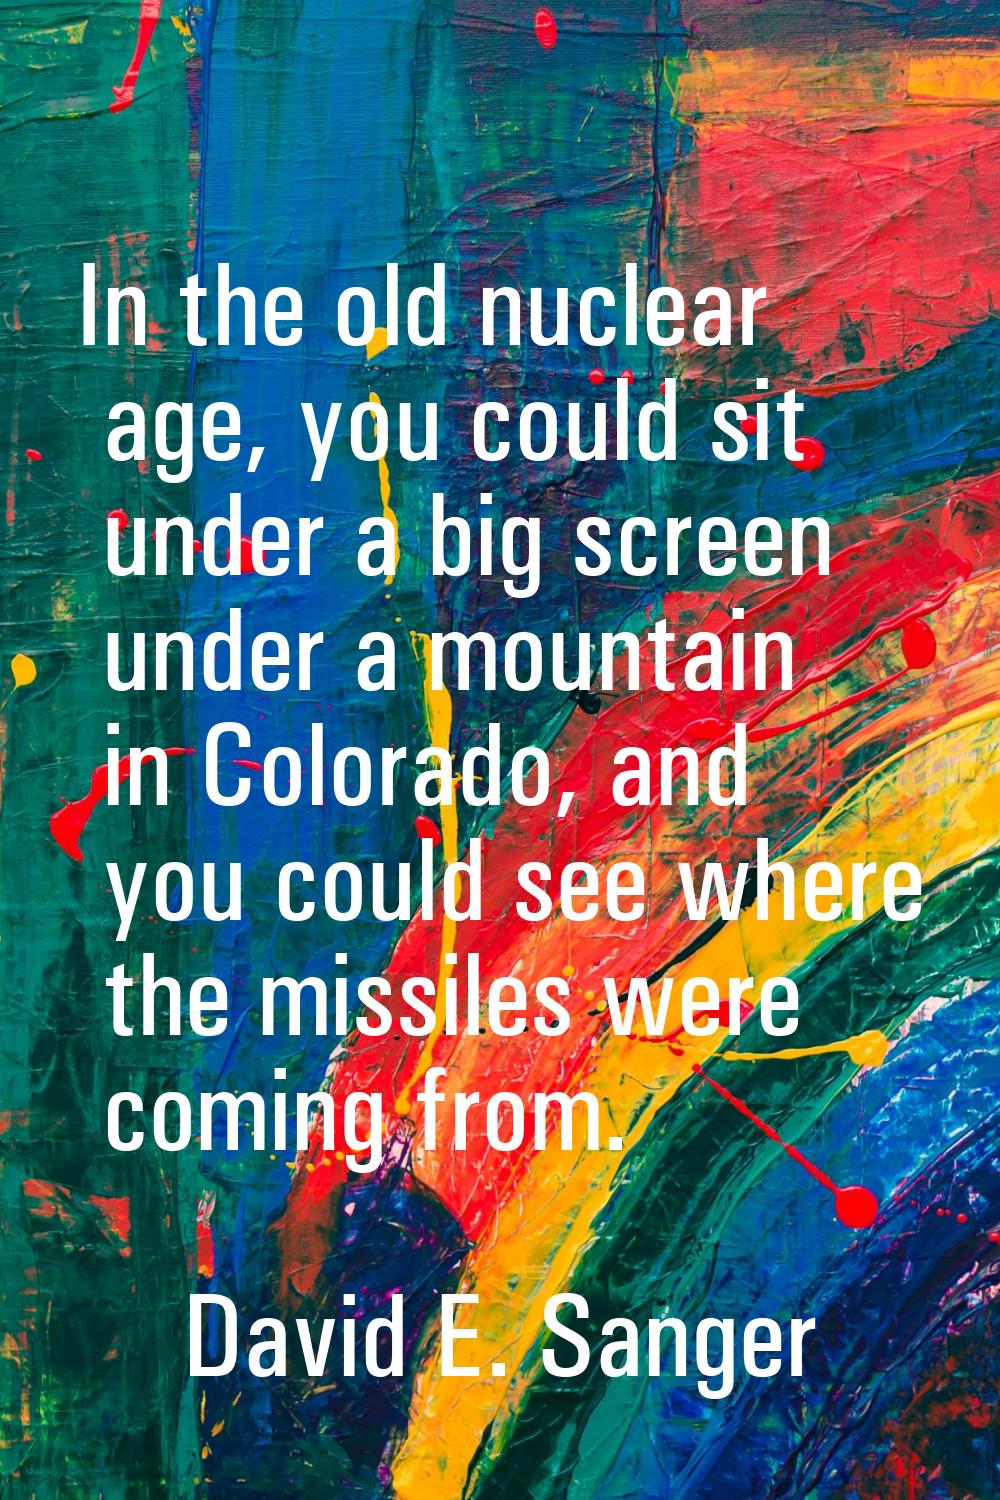 In the old nuclear age, you could sit under a big screen under a mountain in Colorado, and you coul